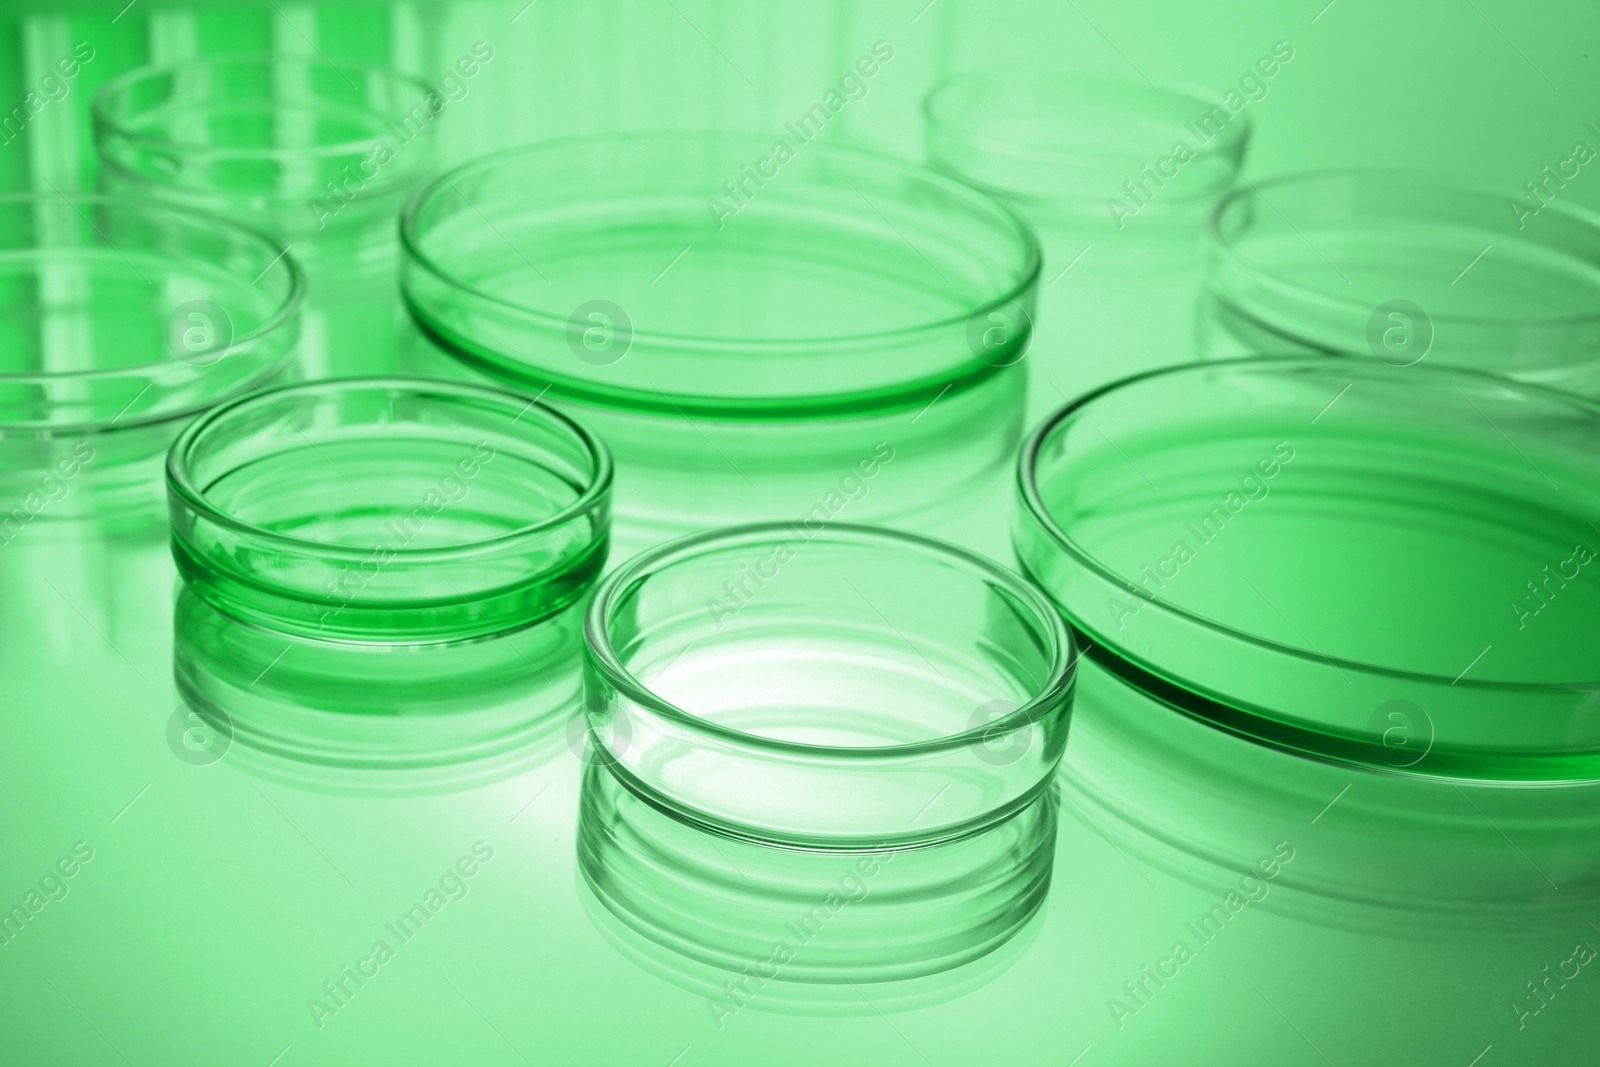 Image of Petri dishes with liquid on table, toned in green. Laboratory glassware